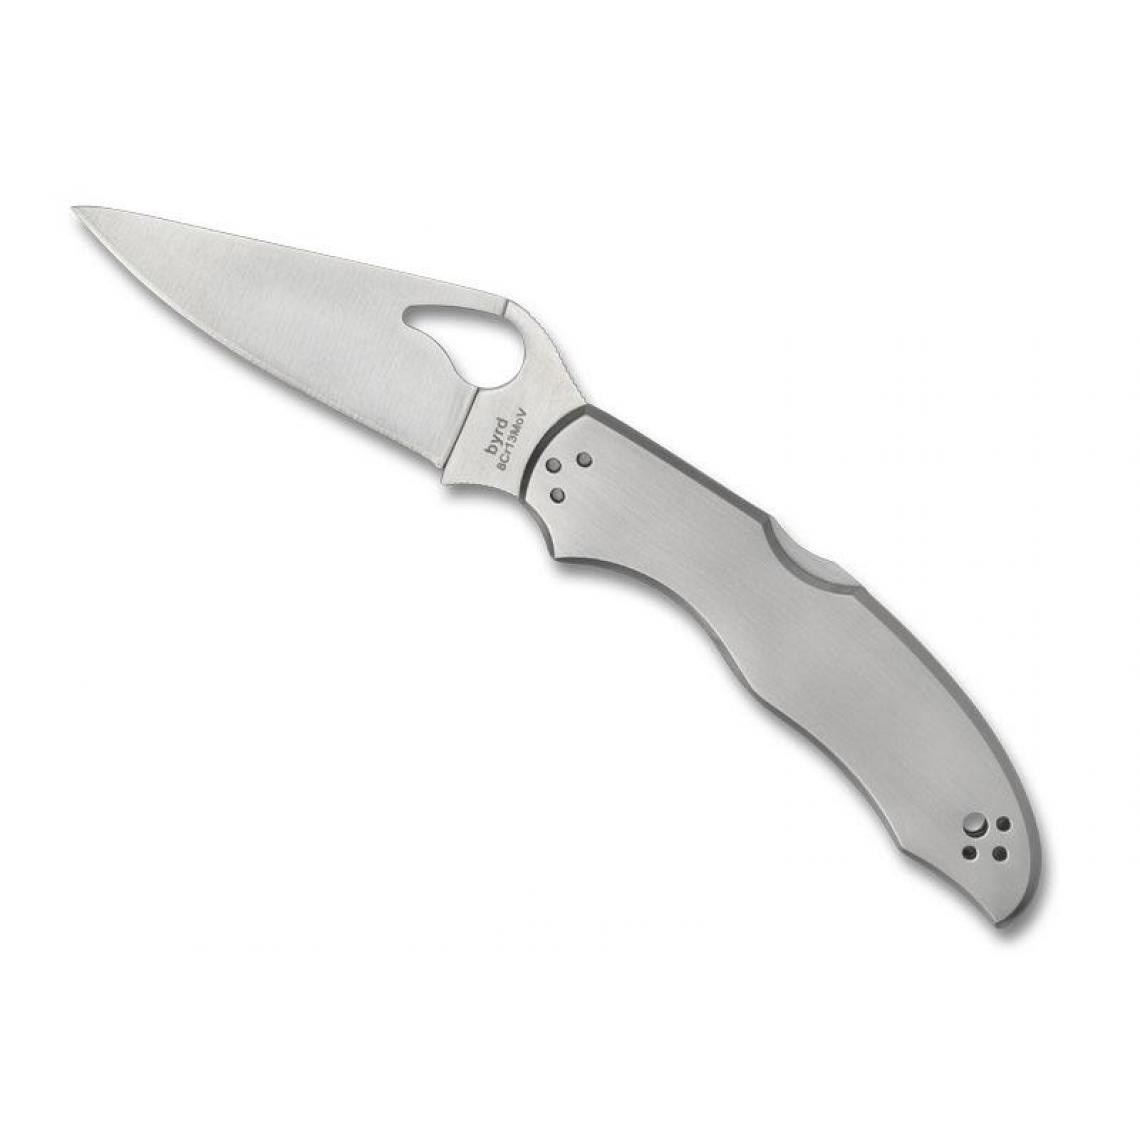 Divers Marques - BYRD KNIFE - BY01P2 - COUTEAU BYRD HARRIER 2 TOUT INOX - Outils de coupe